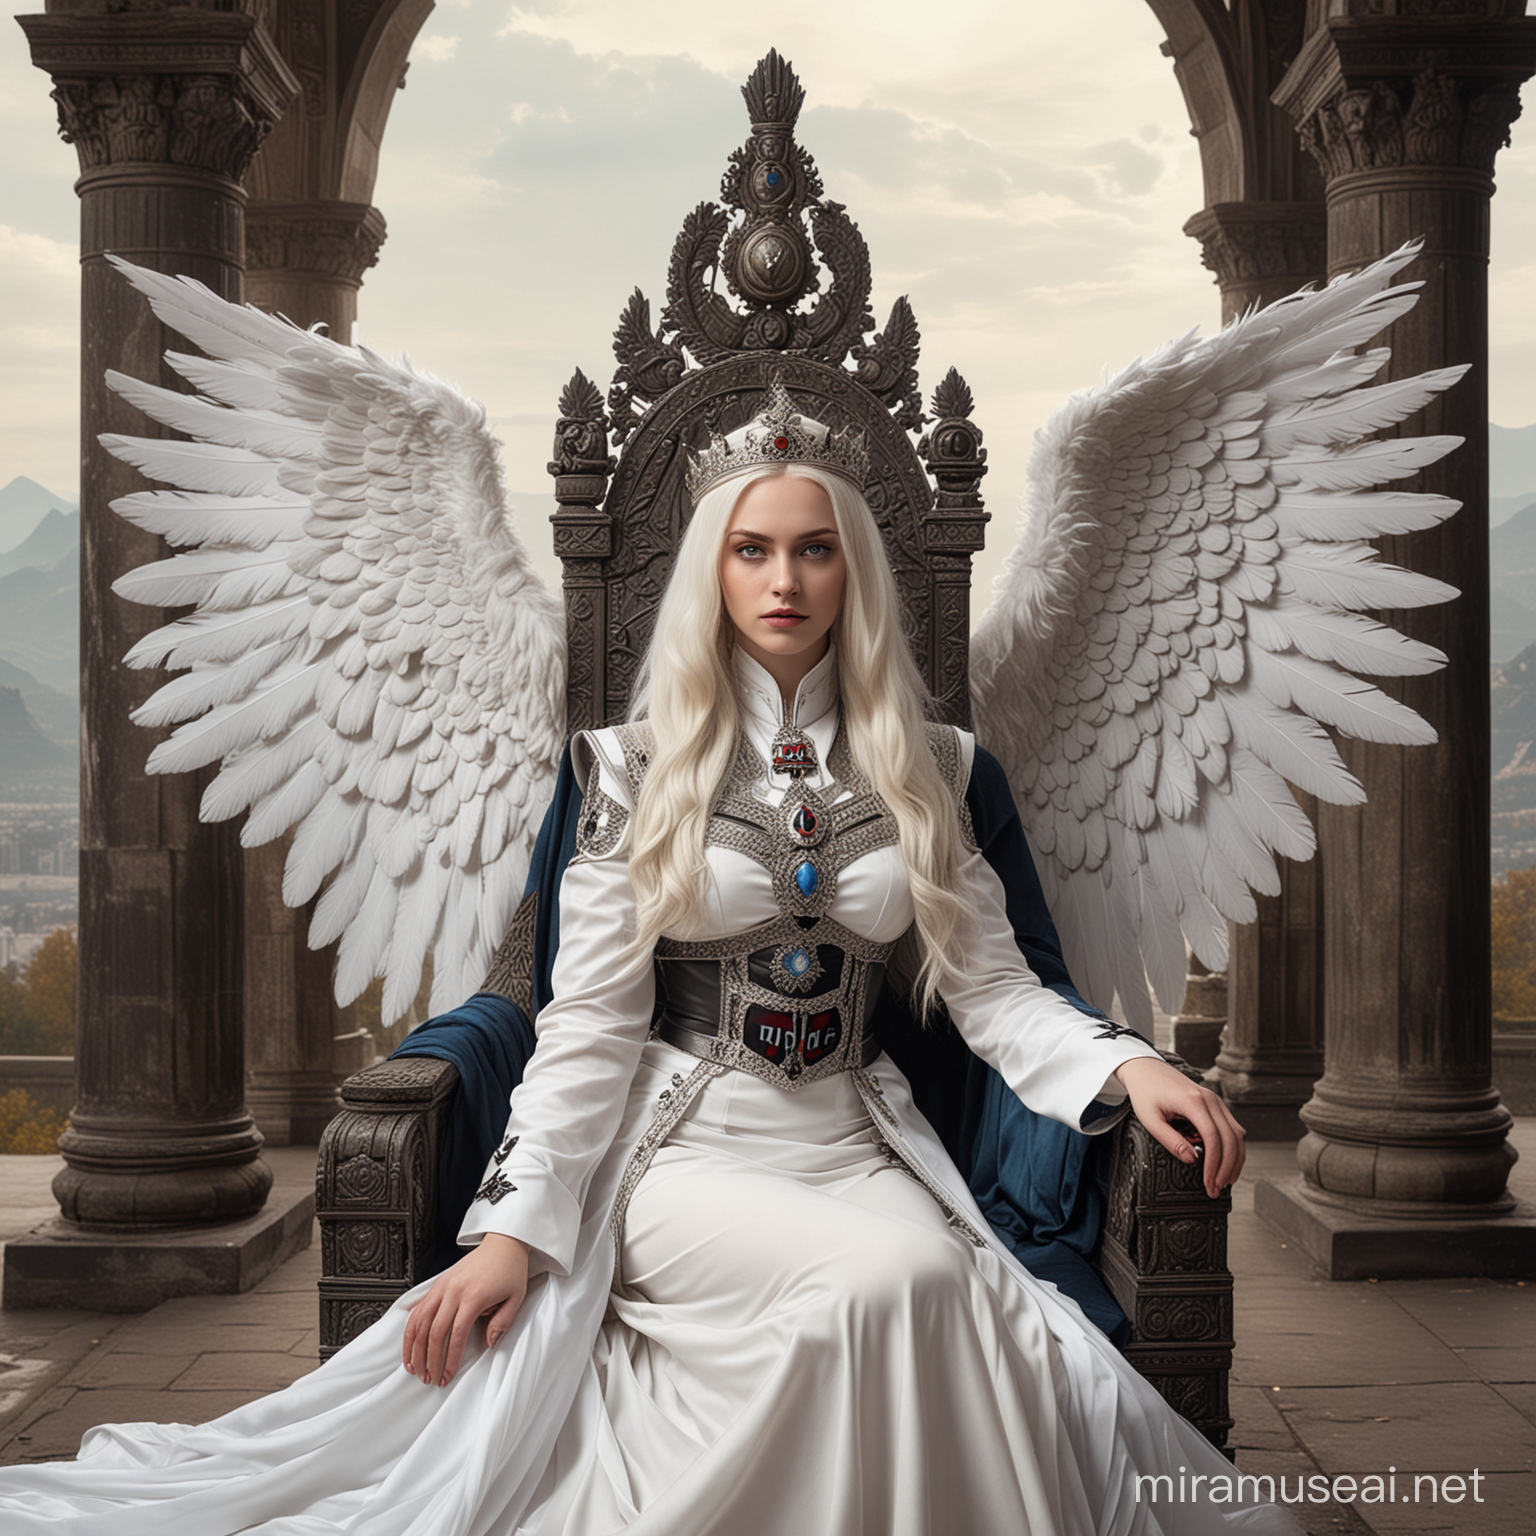 Majestic Nazi Empress Goddess on Throne with Wings in Dark Valley